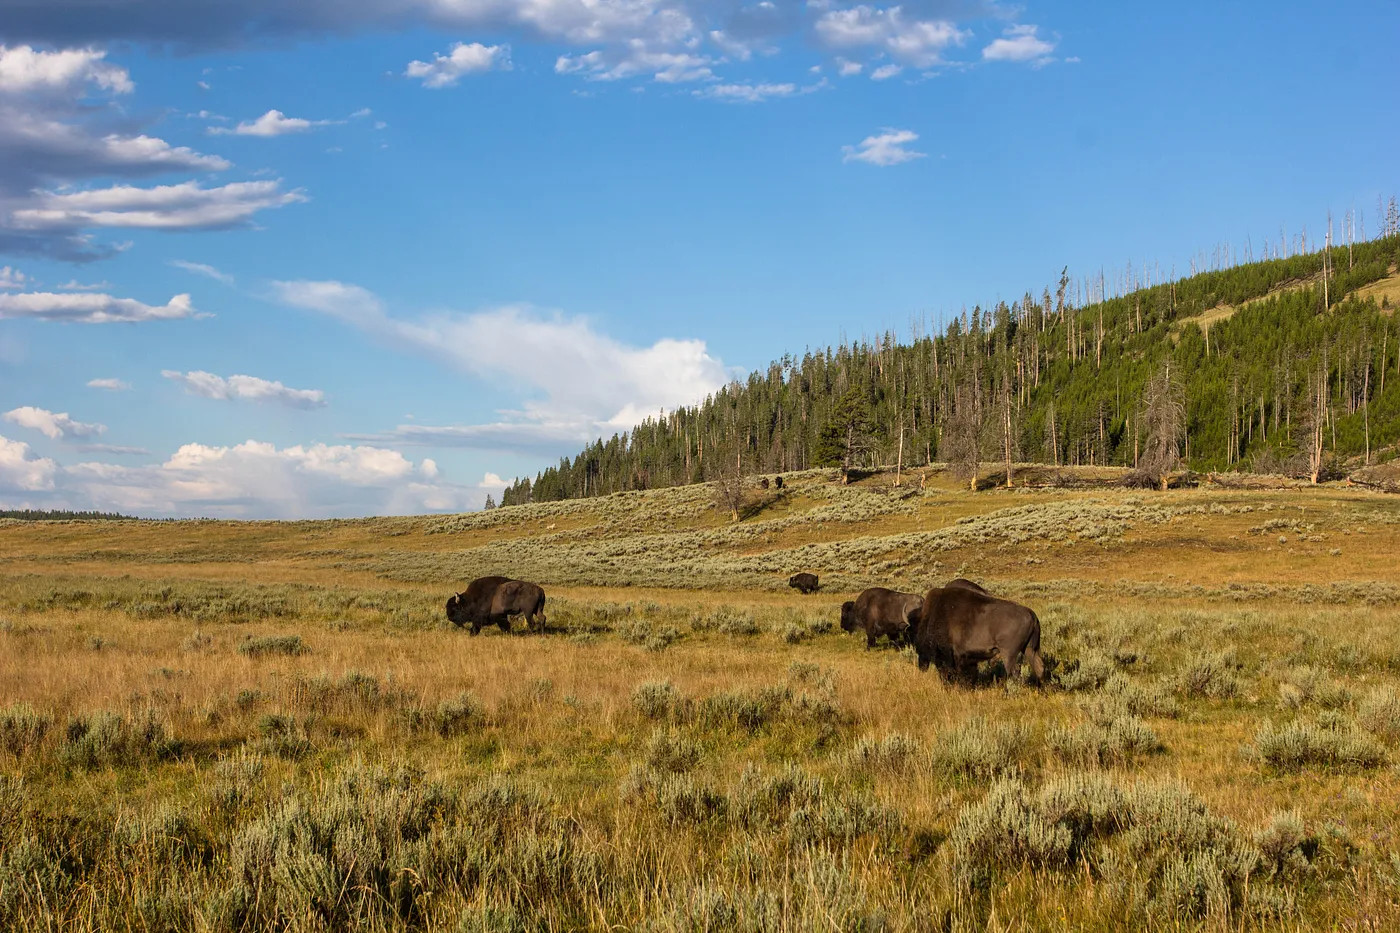 Bison roaming in a meadow in Yellowstone National Park